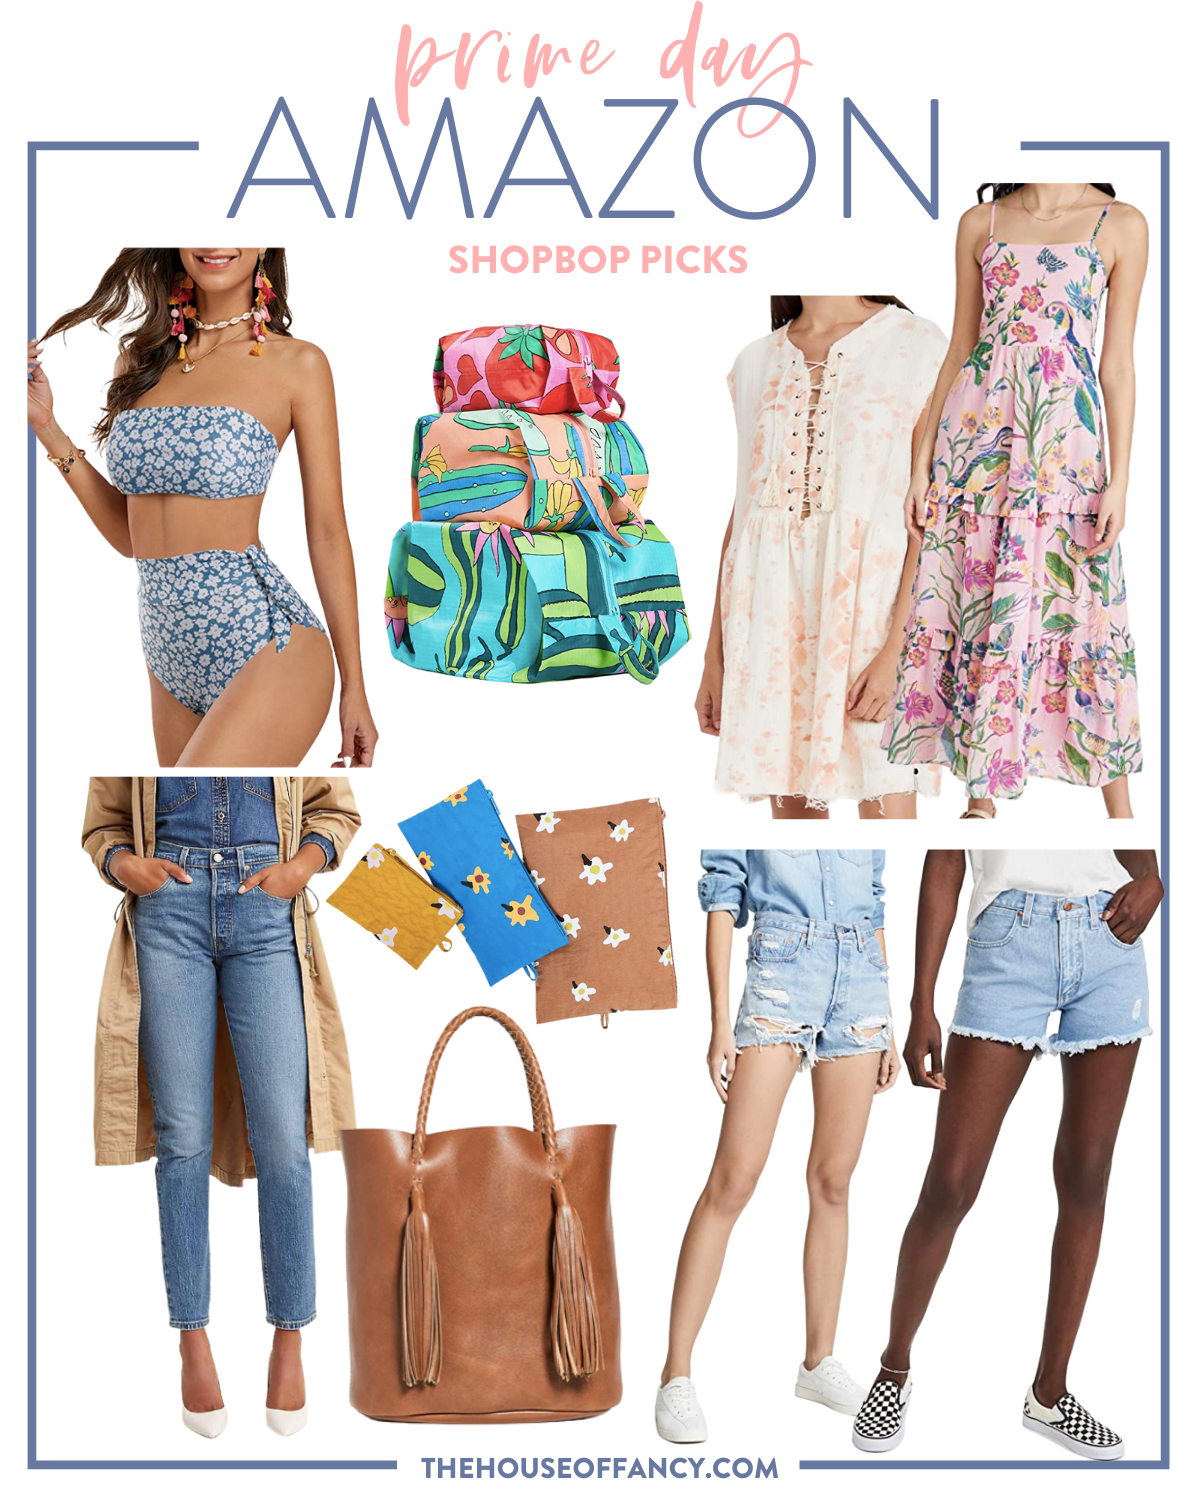 Amazon Prime Day by popular Houston life and style blog, The House of Fancy: collage image of distressed denim shorts, floral cosmetics bags, travel bags, two piece floral print swimsuit, medium wash high waist jeans, orange and white tie dye dress, floral print maxi dress, brown leather tote bag. 